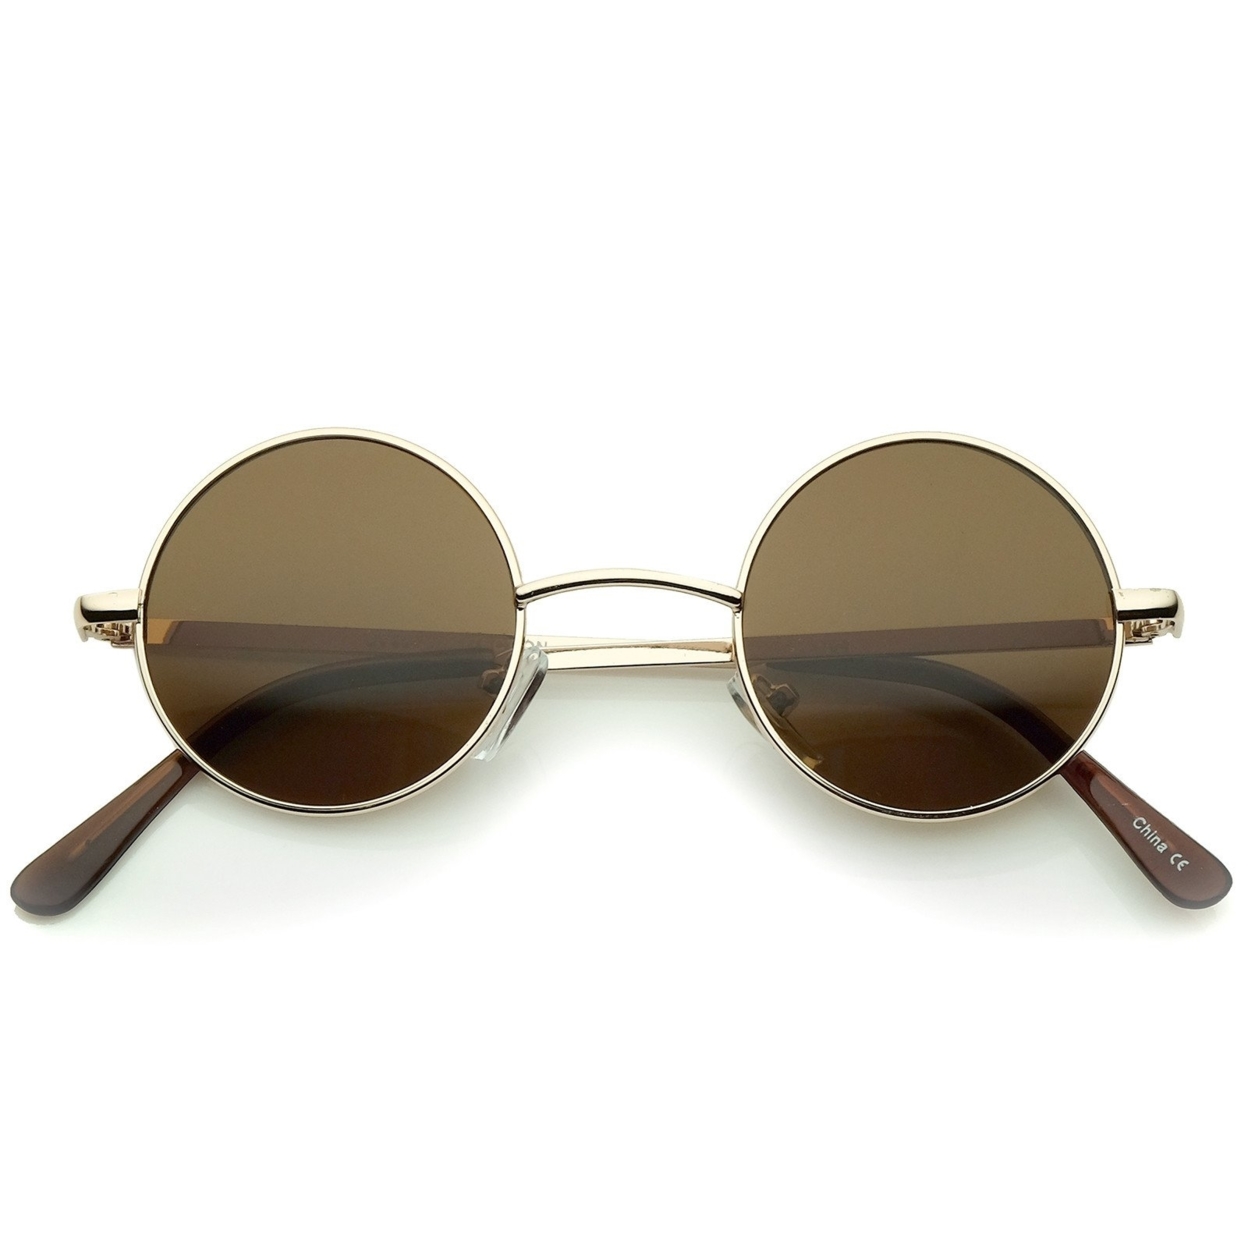 Small Retro Lennon Inspired Style Neutral-Colored Lens Round Metal Sunglasses 41mm - Black / Smoke